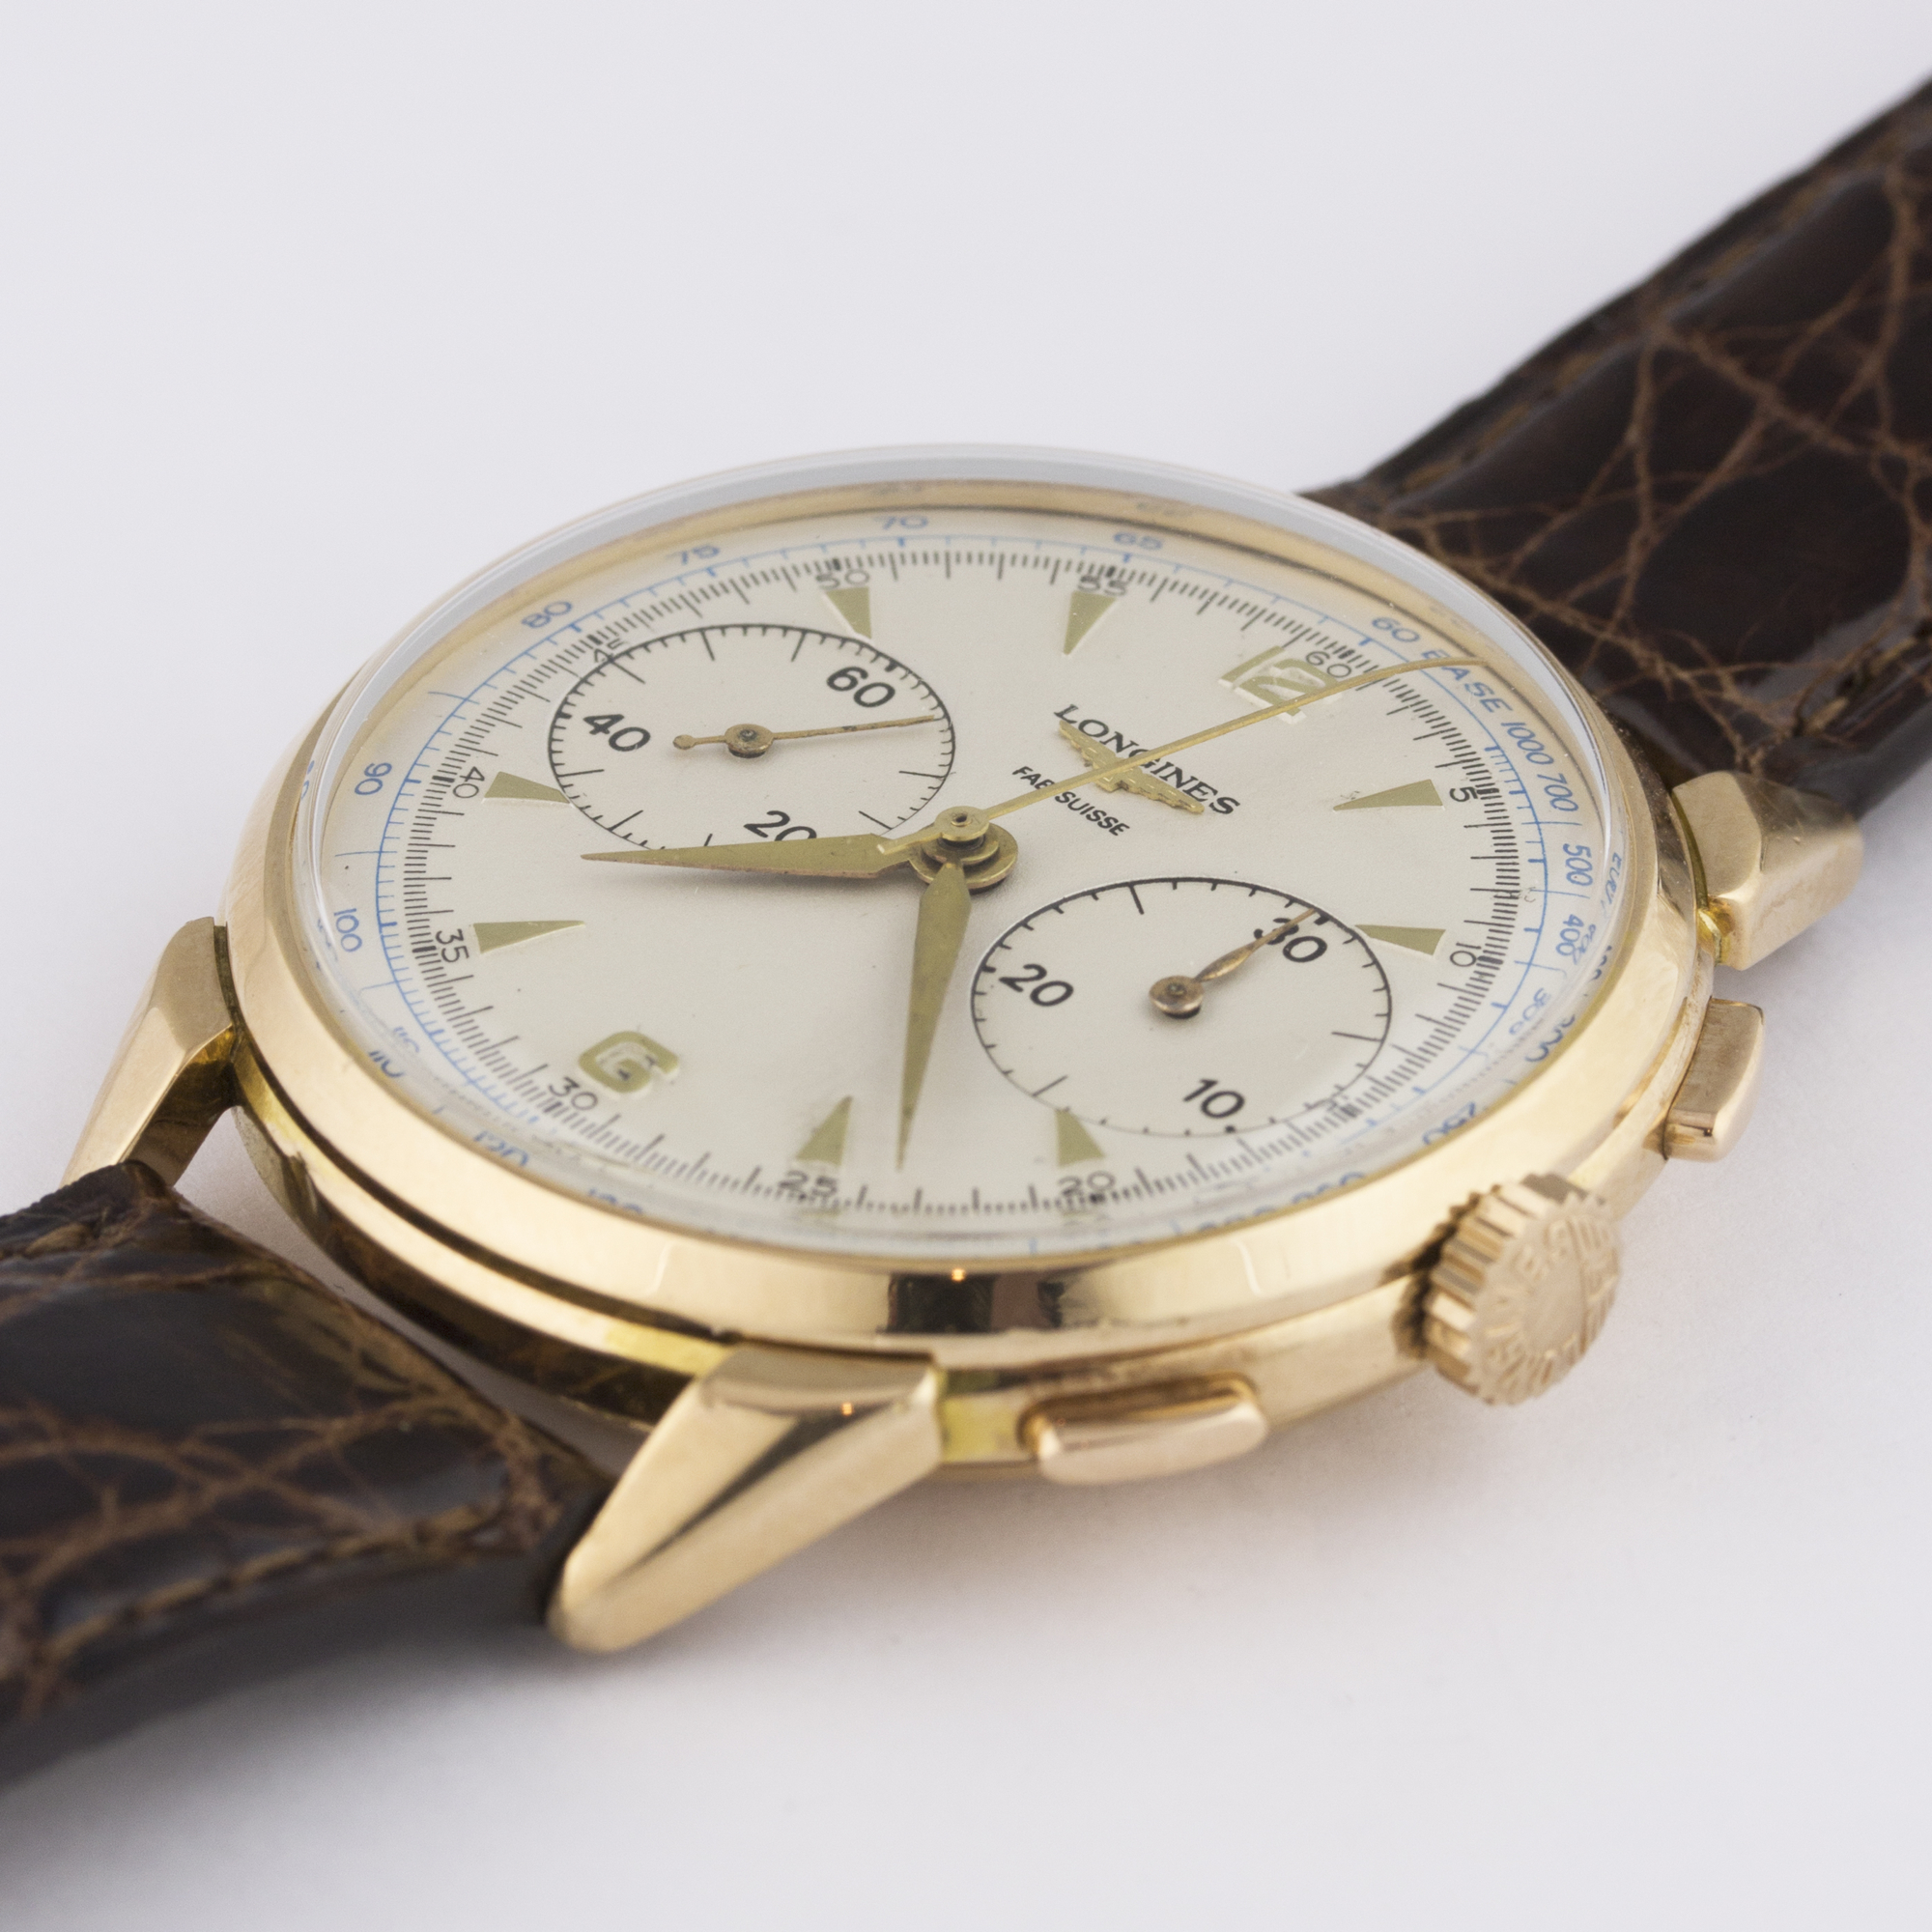 A GENTLEMAN'S 18K SOLID ROSE GOLD LONGINES FLYBACK CHRONOGRAPH WRIST WATCH CIRCA 1950, WITH A COPY - Image 3 of 8